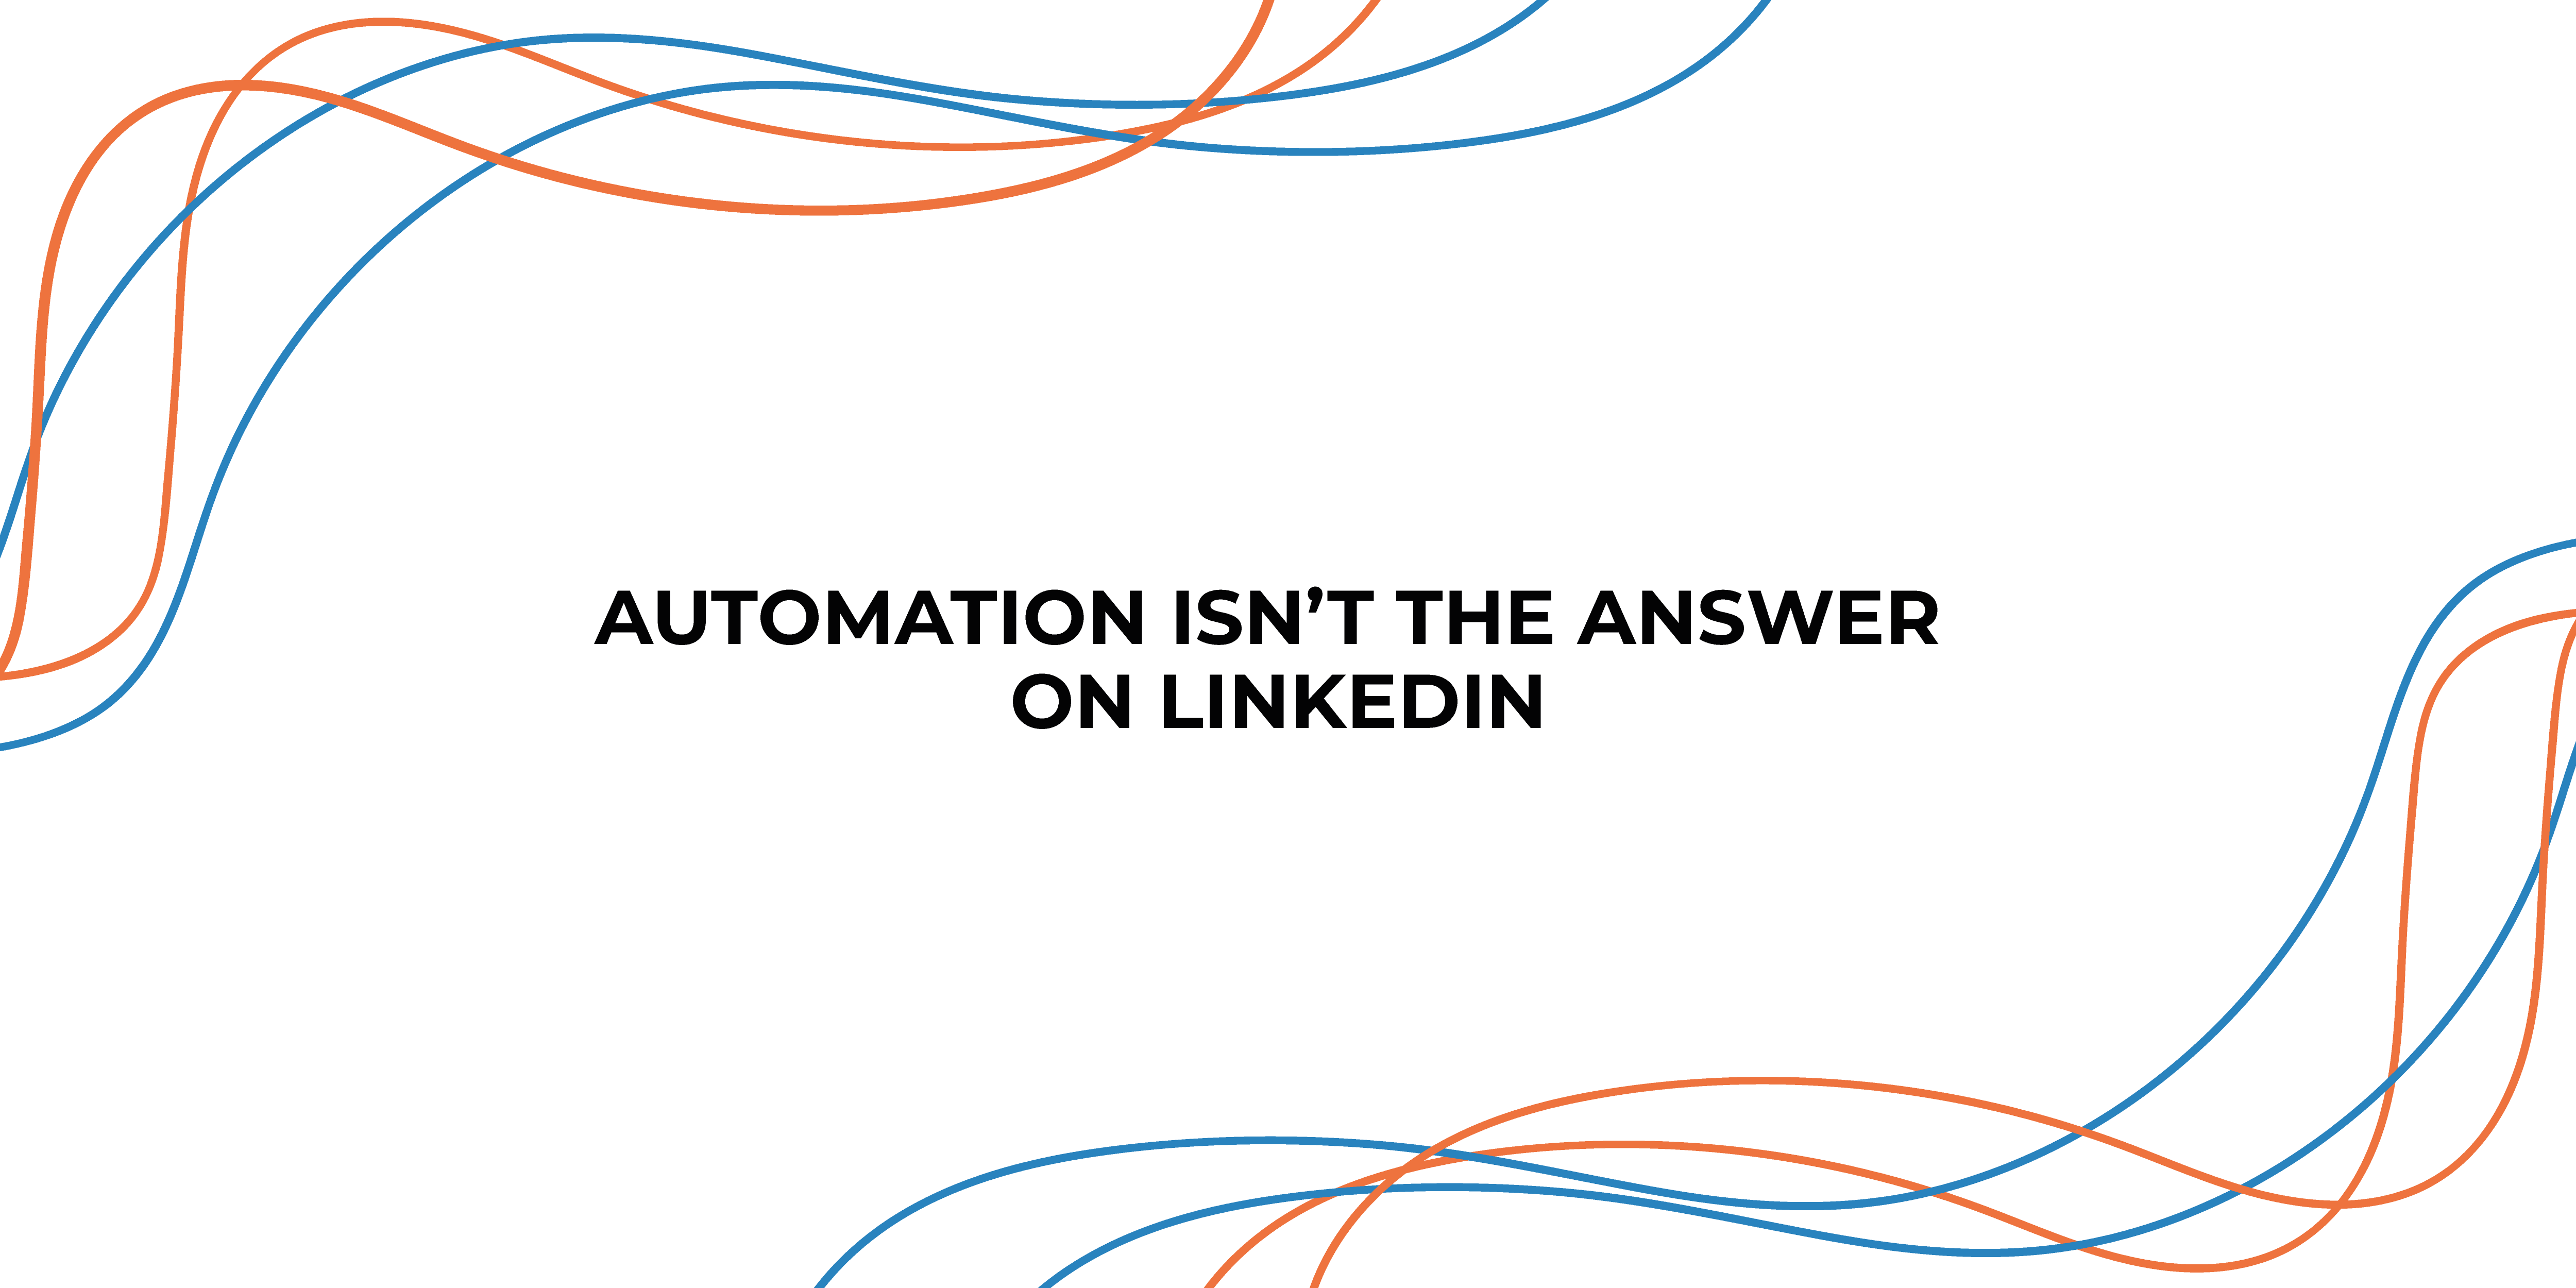 Automation Isn't the Answer on LinkedIn